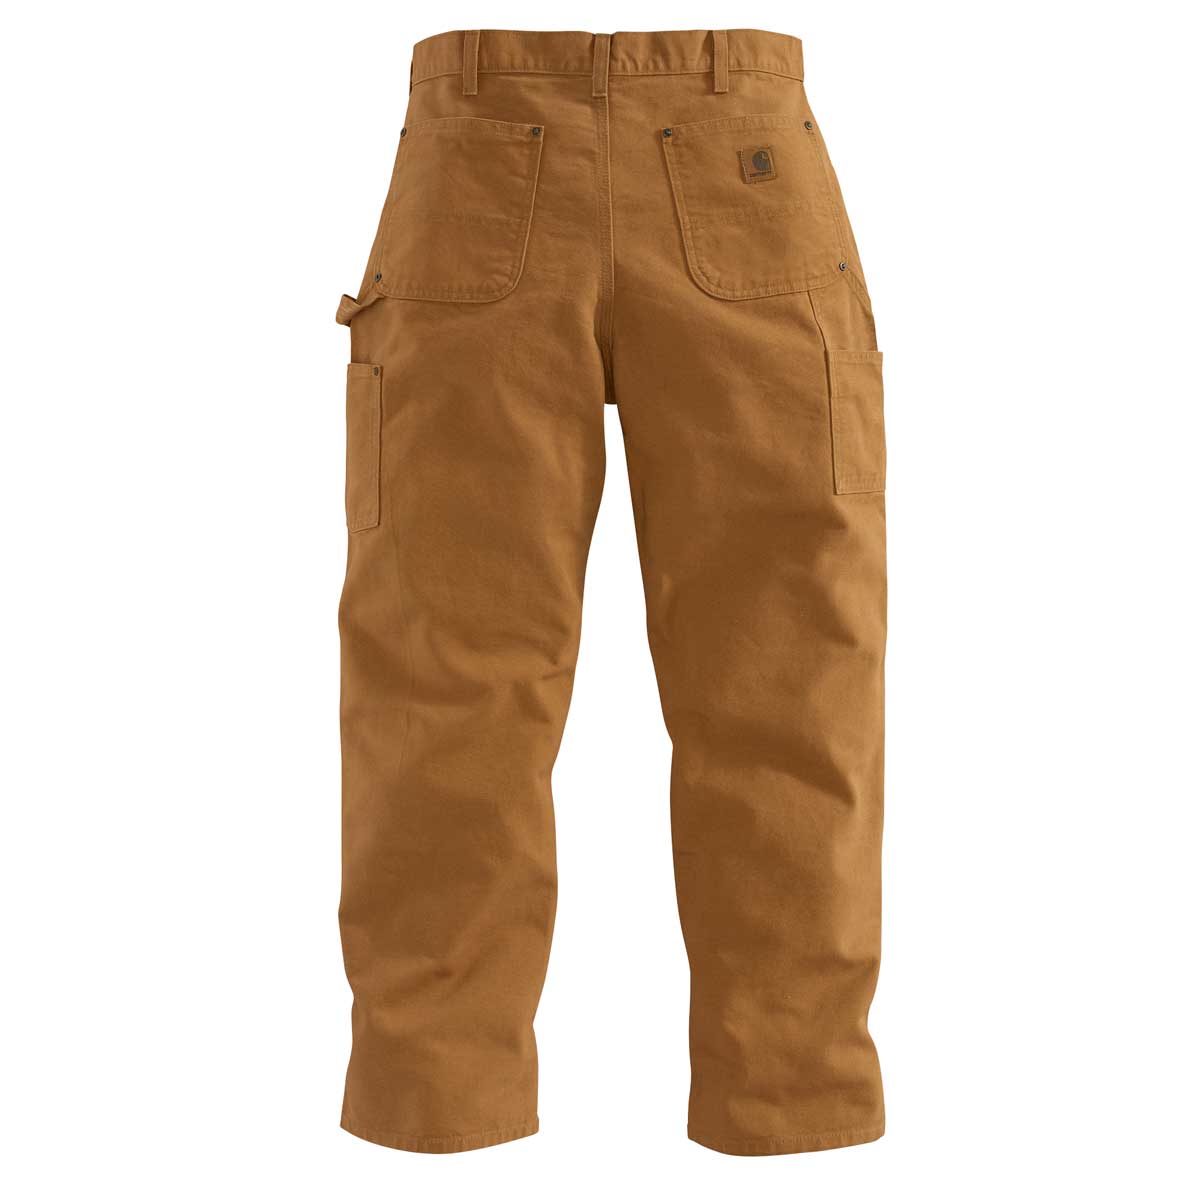 Carhartt B136 Cotton Double Front Work Dungaree | Gempler's